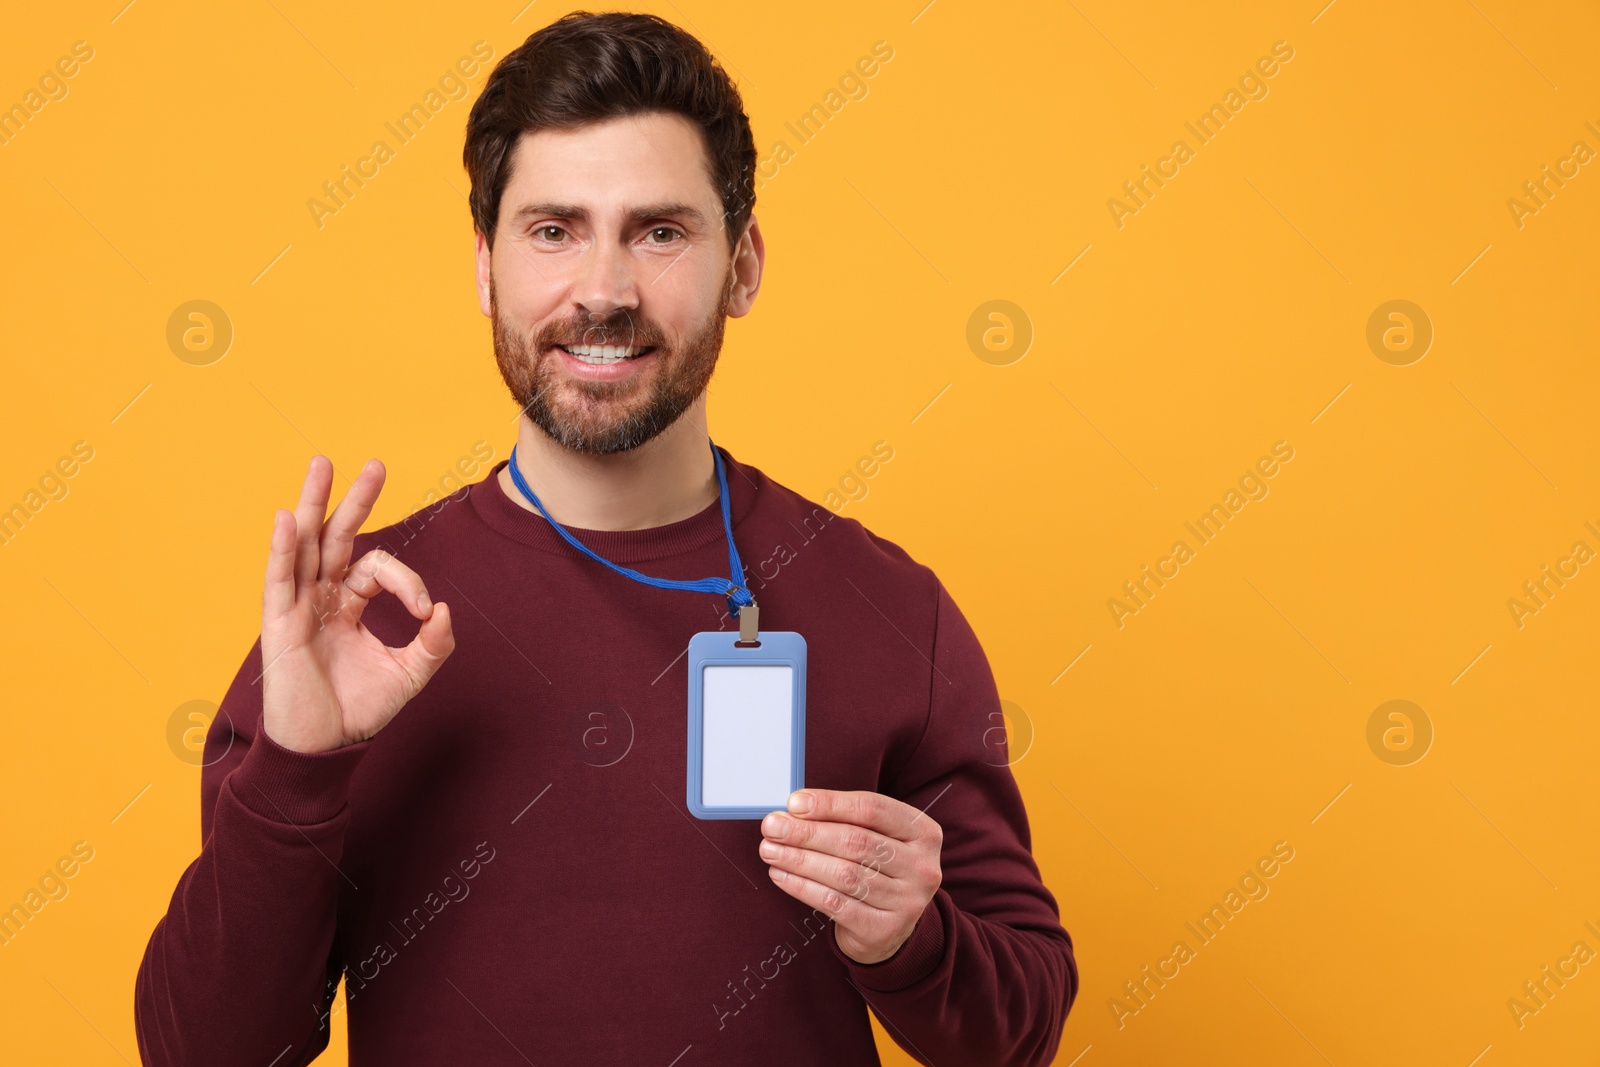 Photo of Smiling man with VIP pass badge showing OK gesture on orange background, space for text